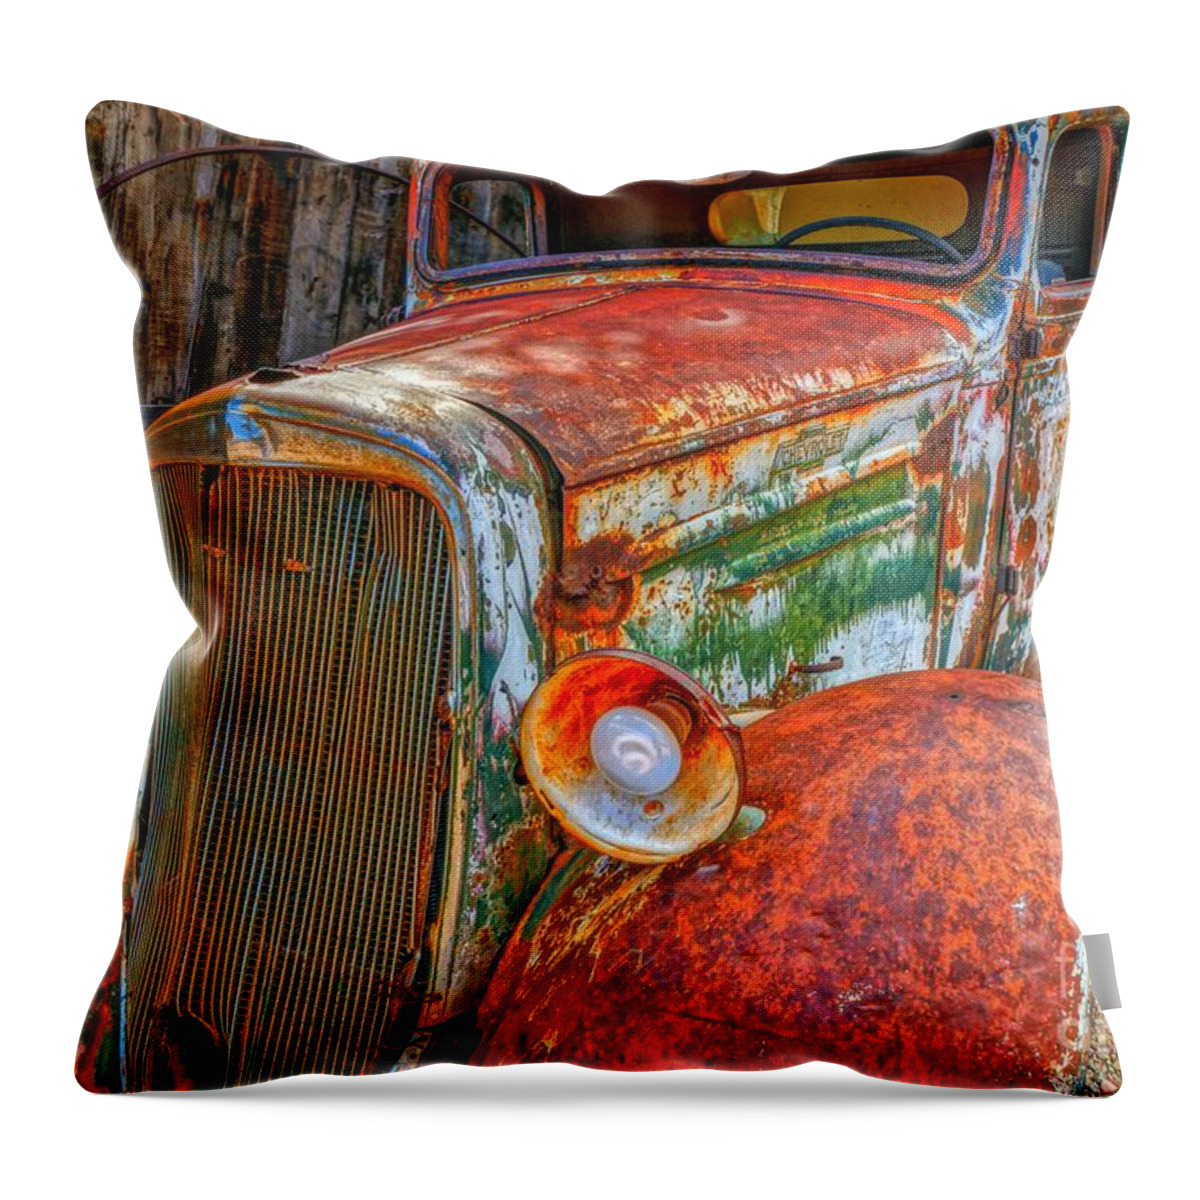  Throw Pillow featuring the photograph The Old Boss by Rodney Lee Williams